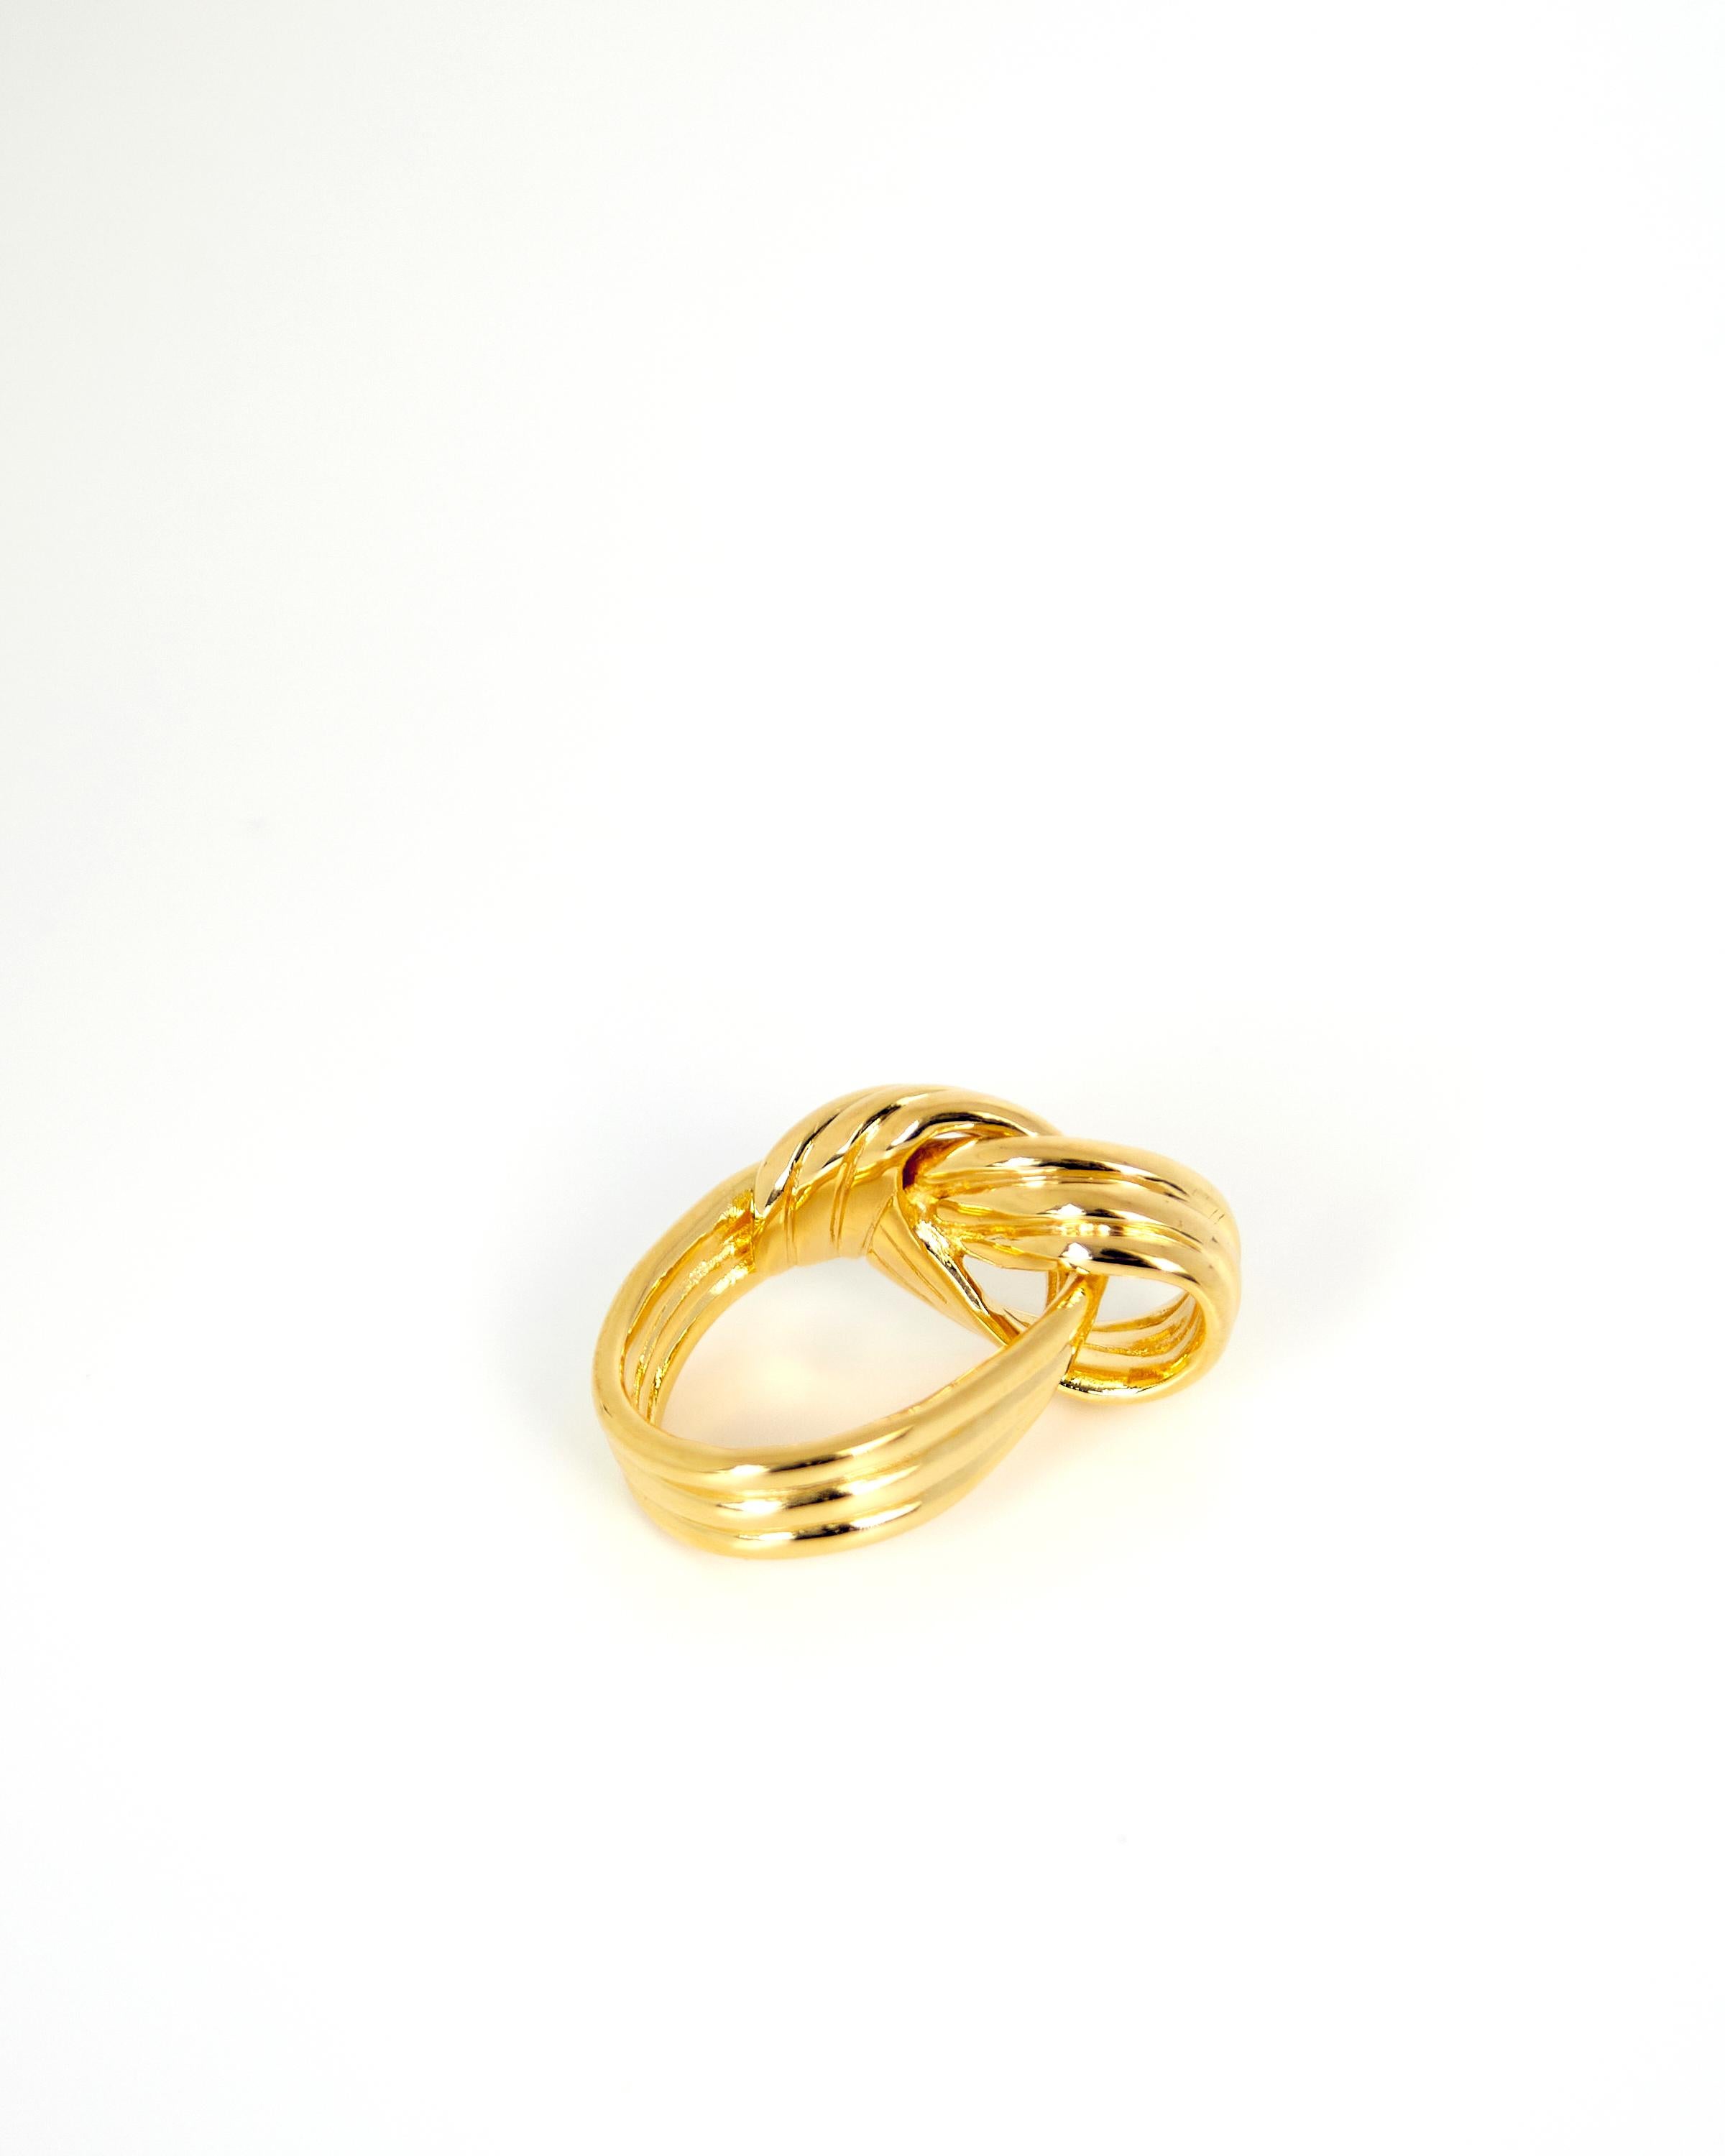 Women's or Men's 70s Inspired Braid Ring, 18 Carat Gold Plated (Large) For Sale